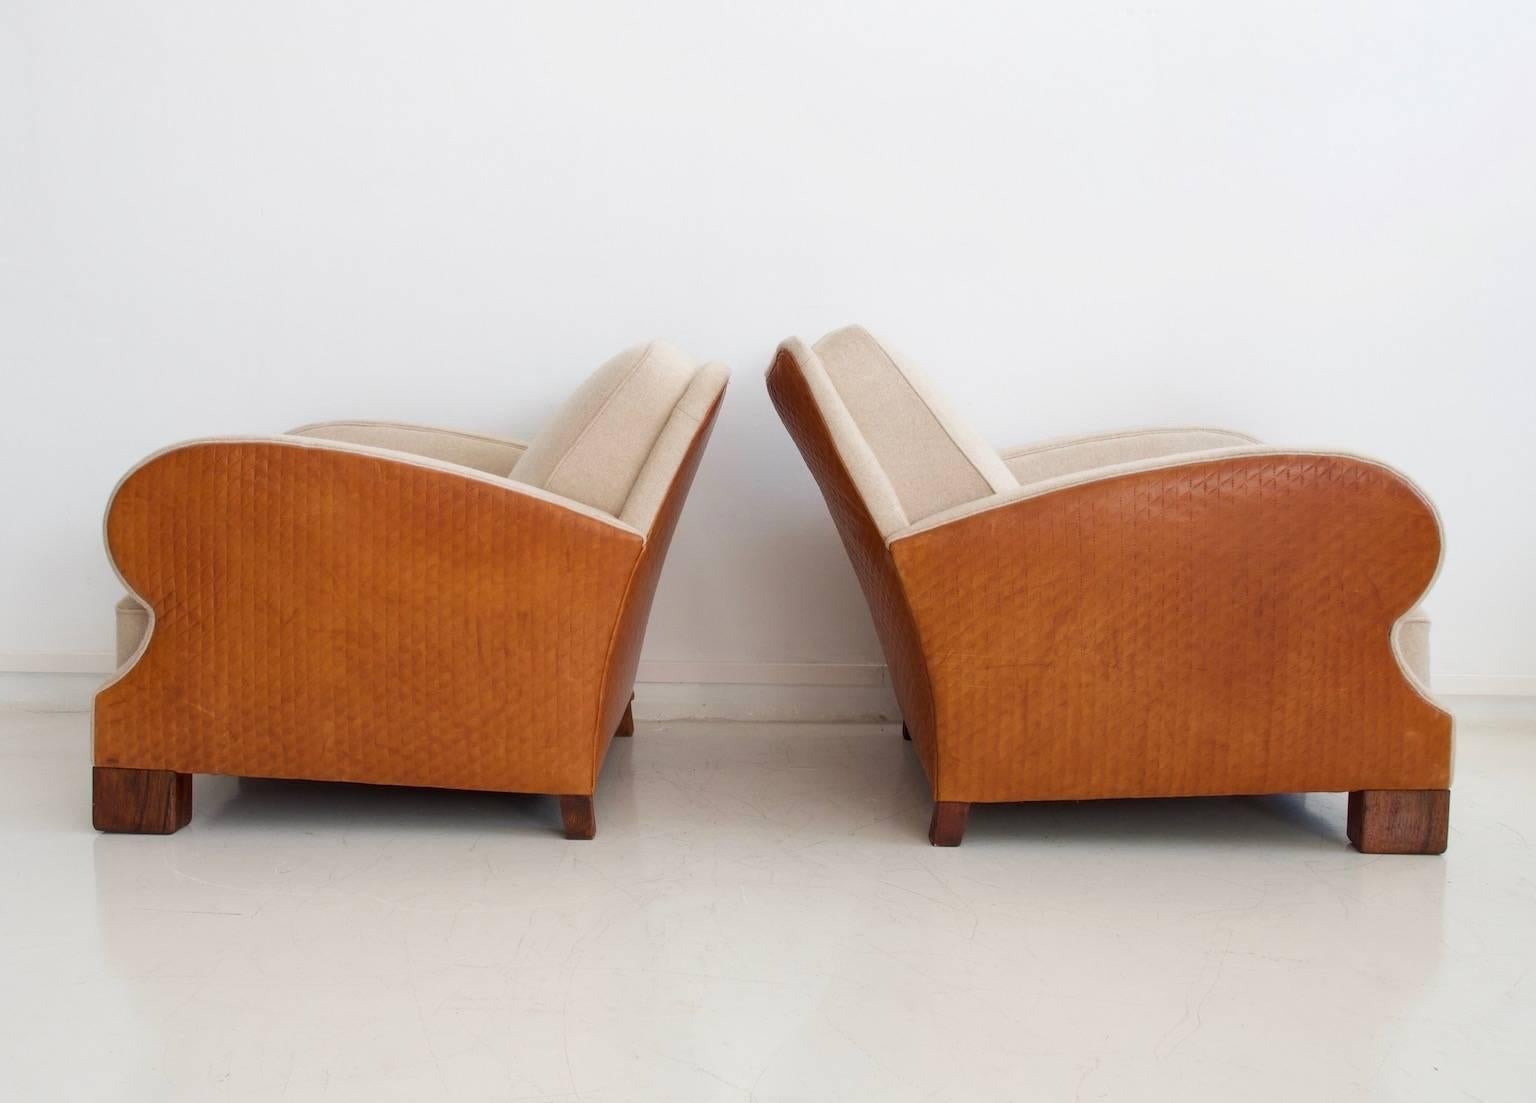 European Pair of Art Deco Style Wool and Leather Upholstered Armchairs, circa 1930